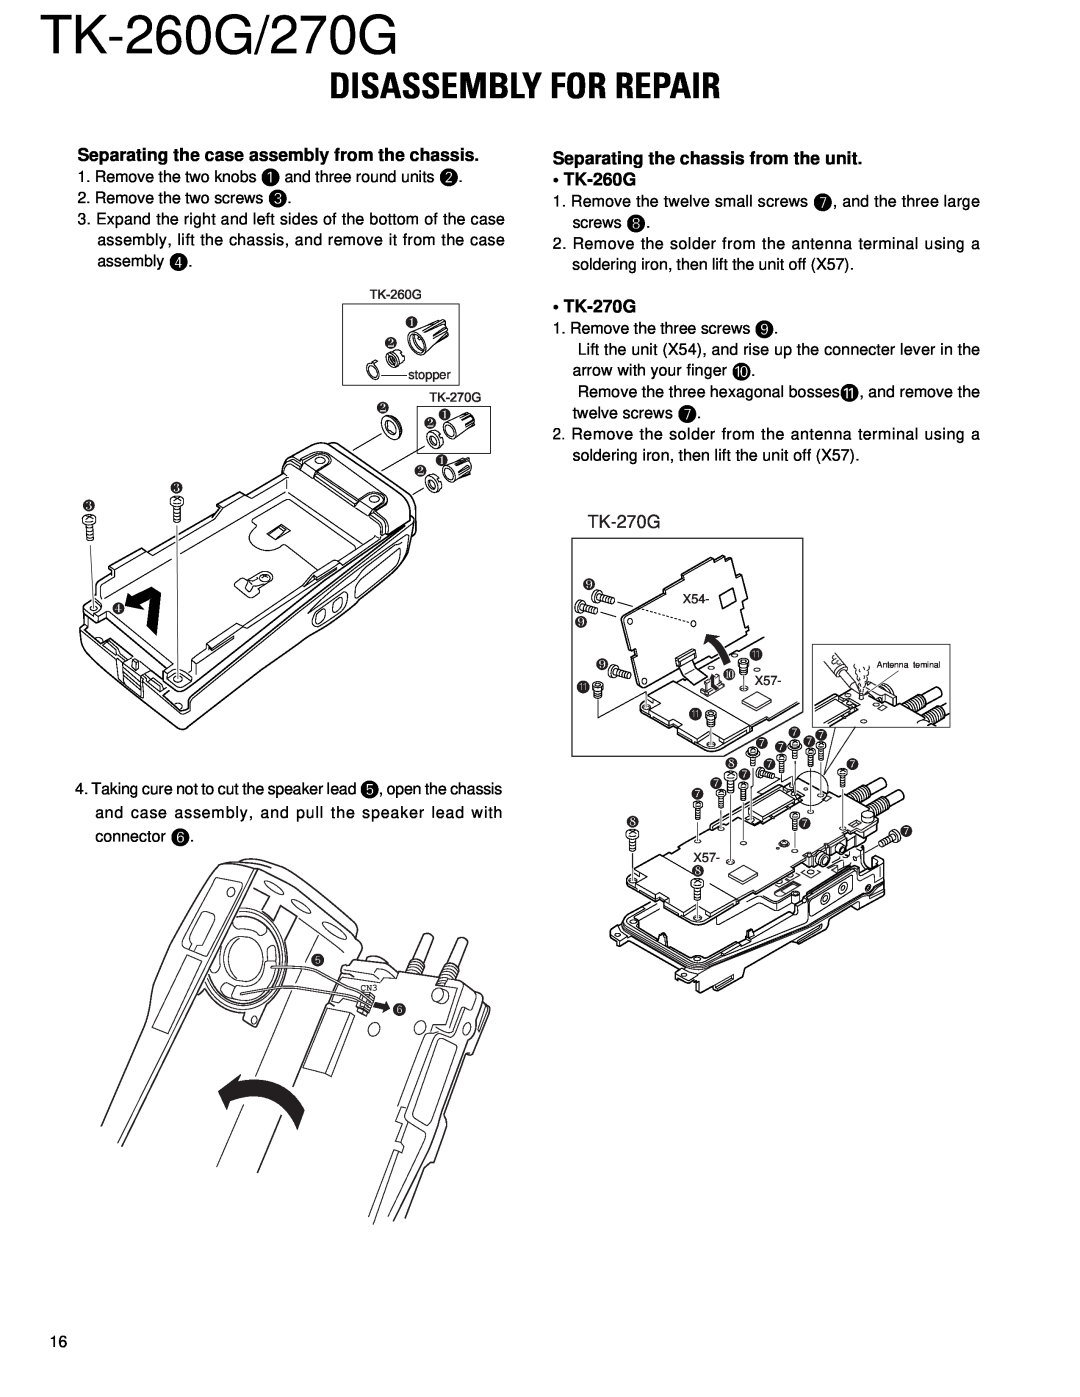 Kenwood service manual Disassembly For Repair, Separating the case assembly from the chassis, • TK-270G, TK-260G/270G 